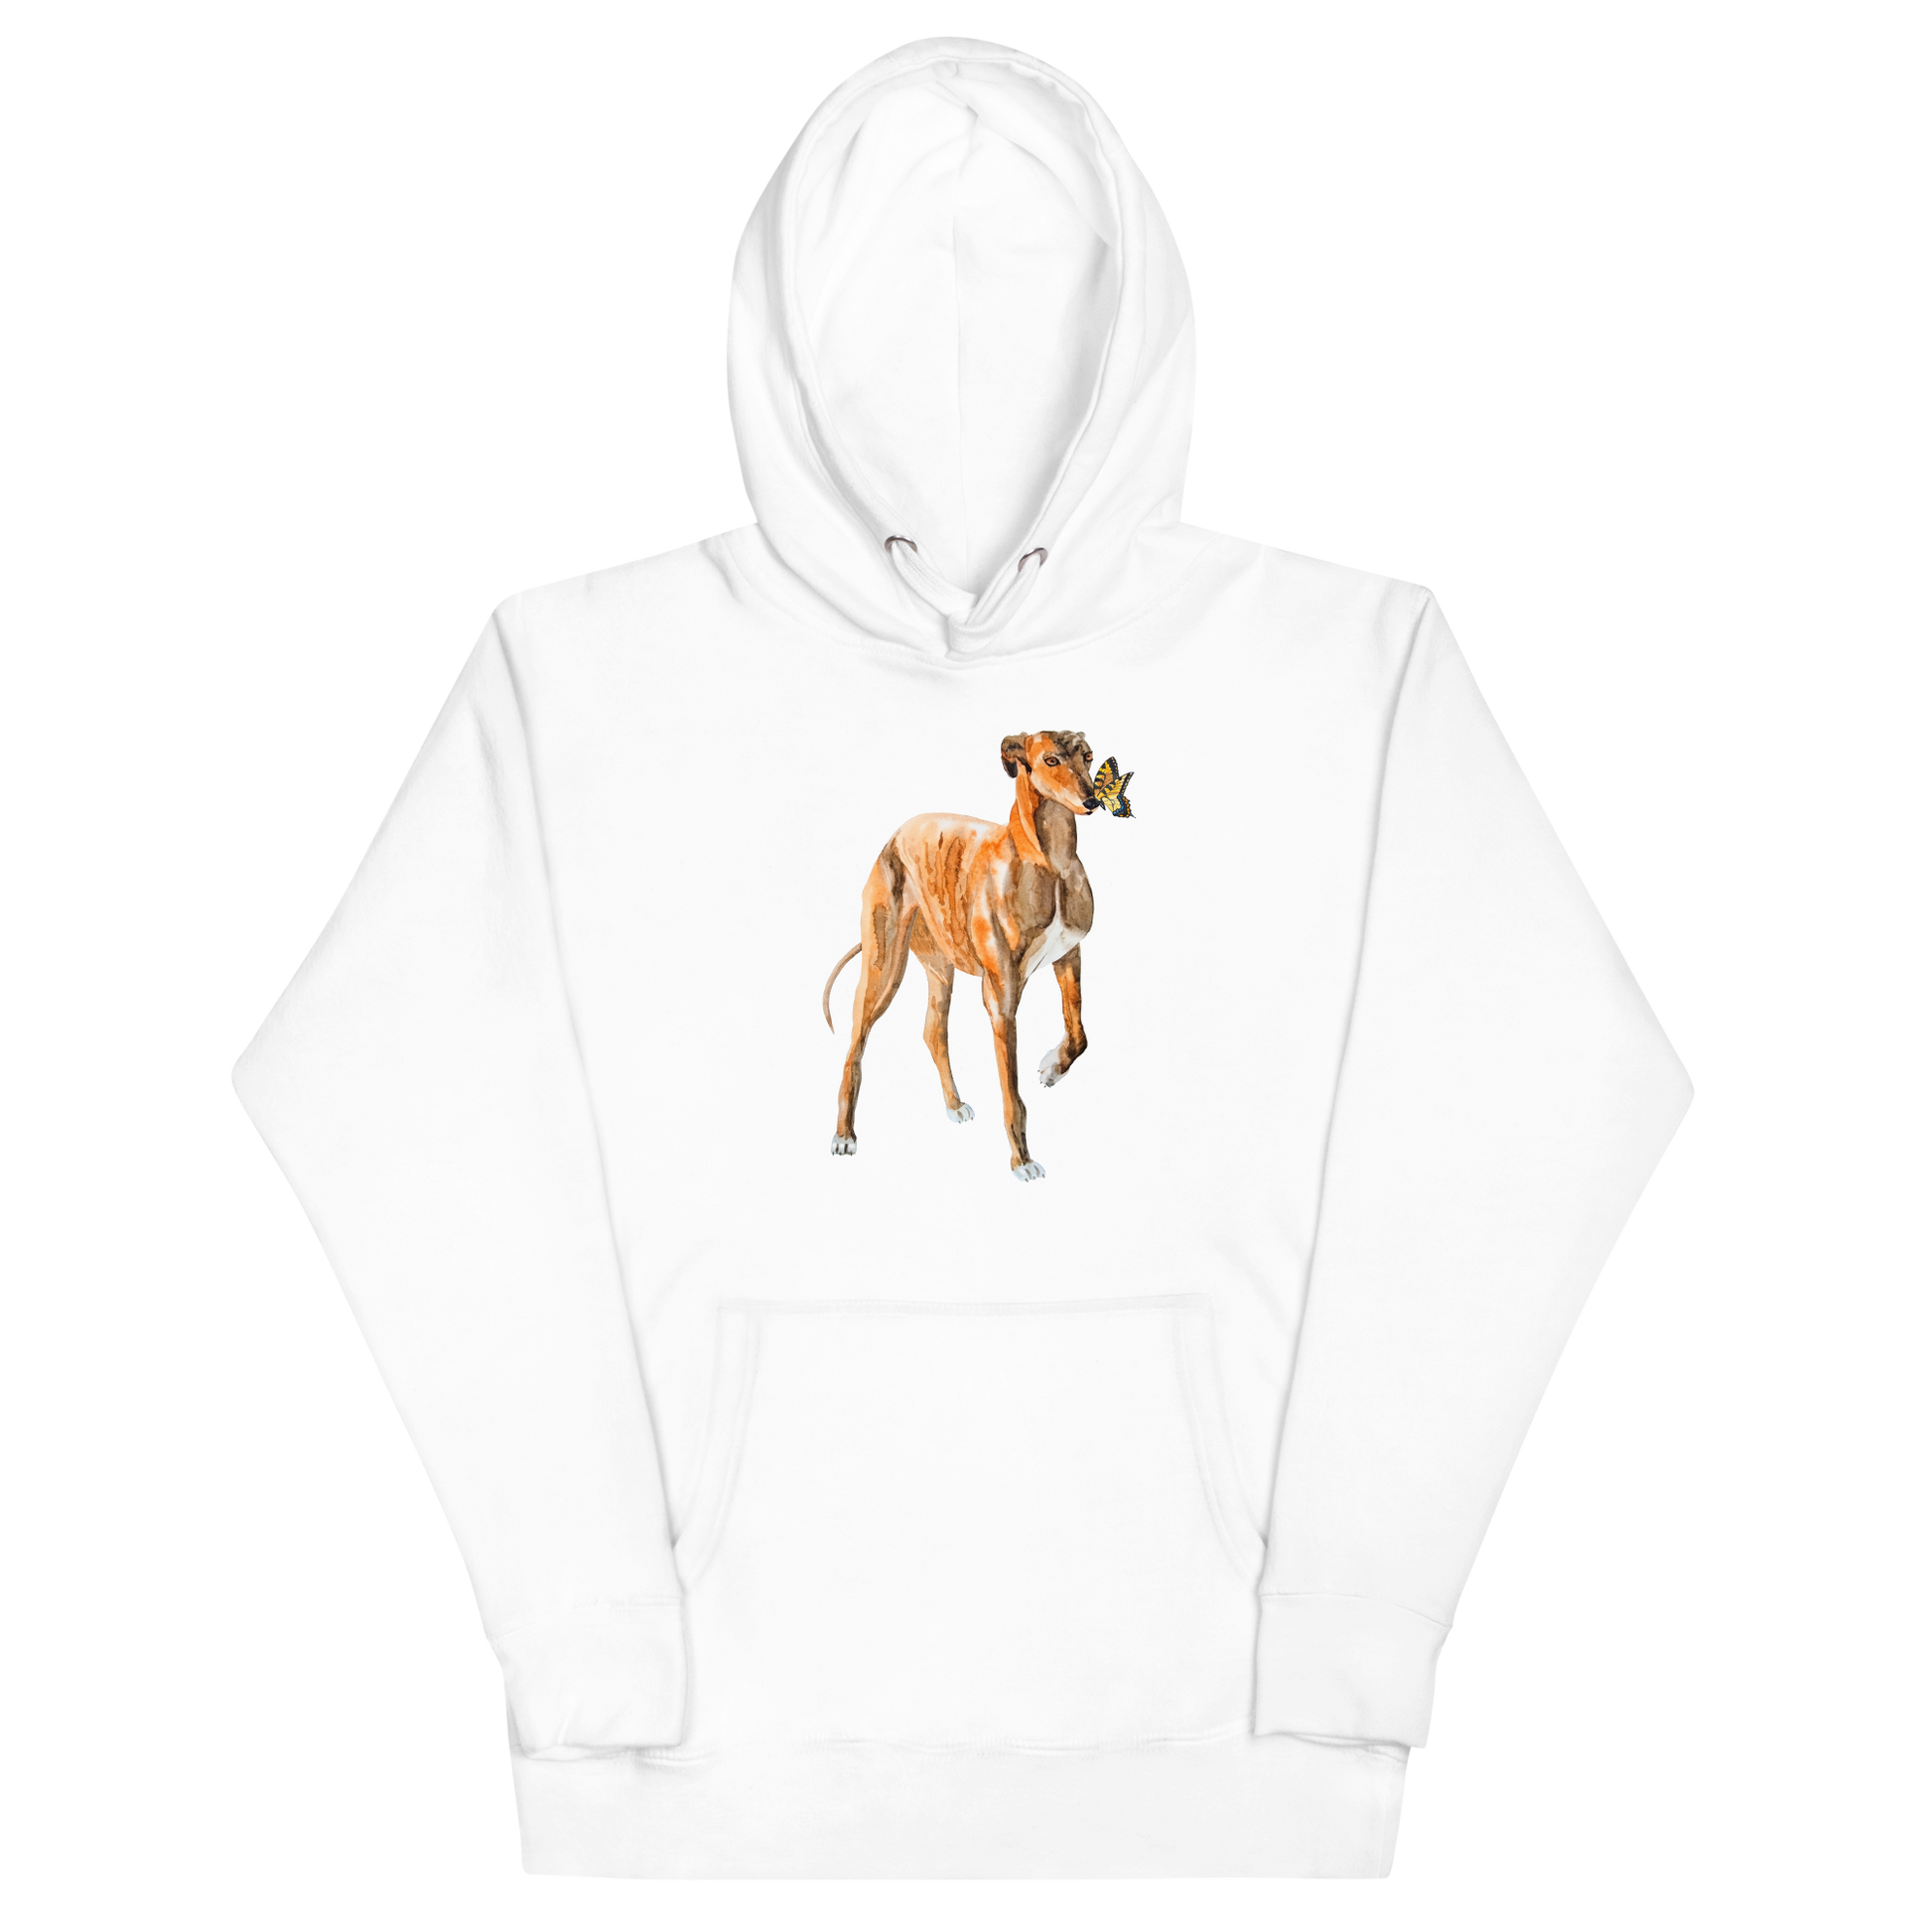 White Premium Greyhound Hoodie featuring an adorable Greyhound And Butterfly graphic on the chest - Cute Graphic Greyhound Hoodies - Boozy Fox